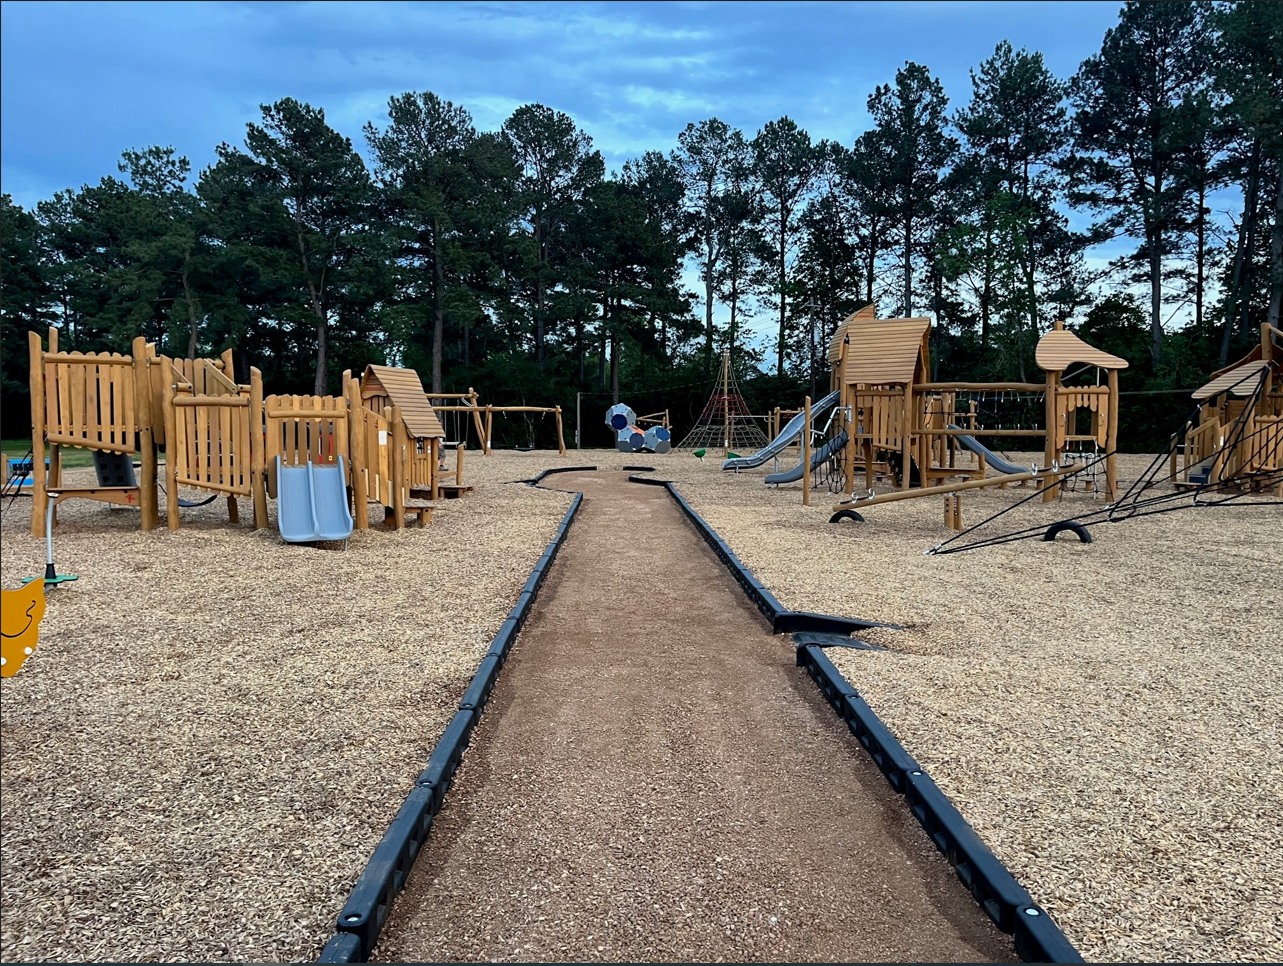 New Playground Equipment Ready for Play at Matheson Park